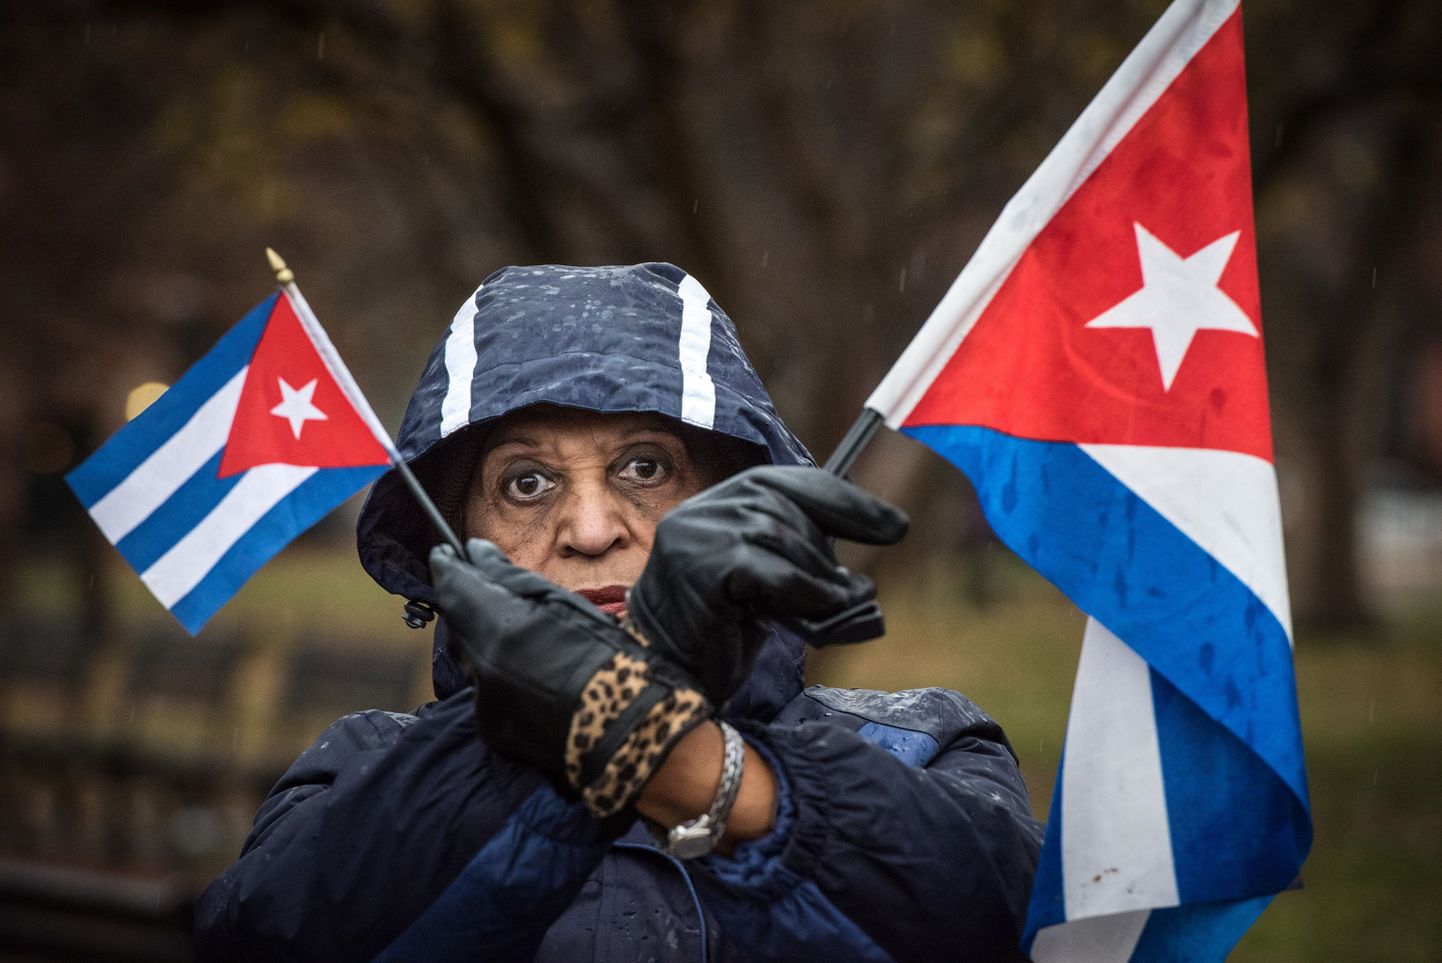 Violetta Pons of Miami, Fla., holds Cuban flags to raise awareness of continued oppression and human rights abuses by the Castro regime during a rally across the street from the White House in Washington, D.C., on Thursday, Dec. 17, 2015. (Photo by Ken Cedeno/McClatchy DC/TNS) *** Please Use Credit from Credit Field ***